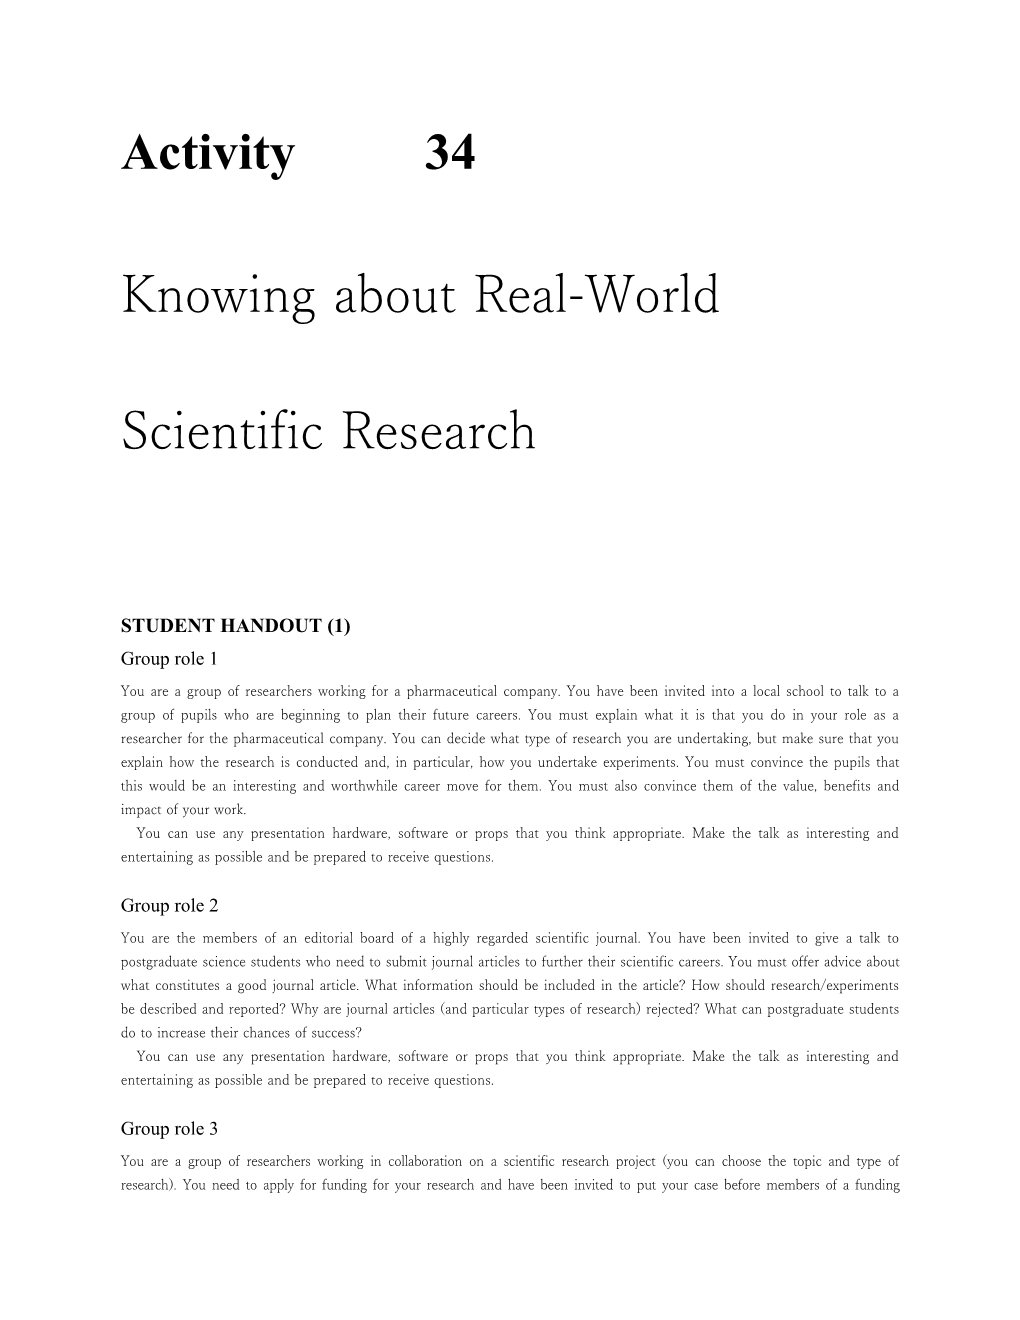 Knowing About Real-World Scientific Research